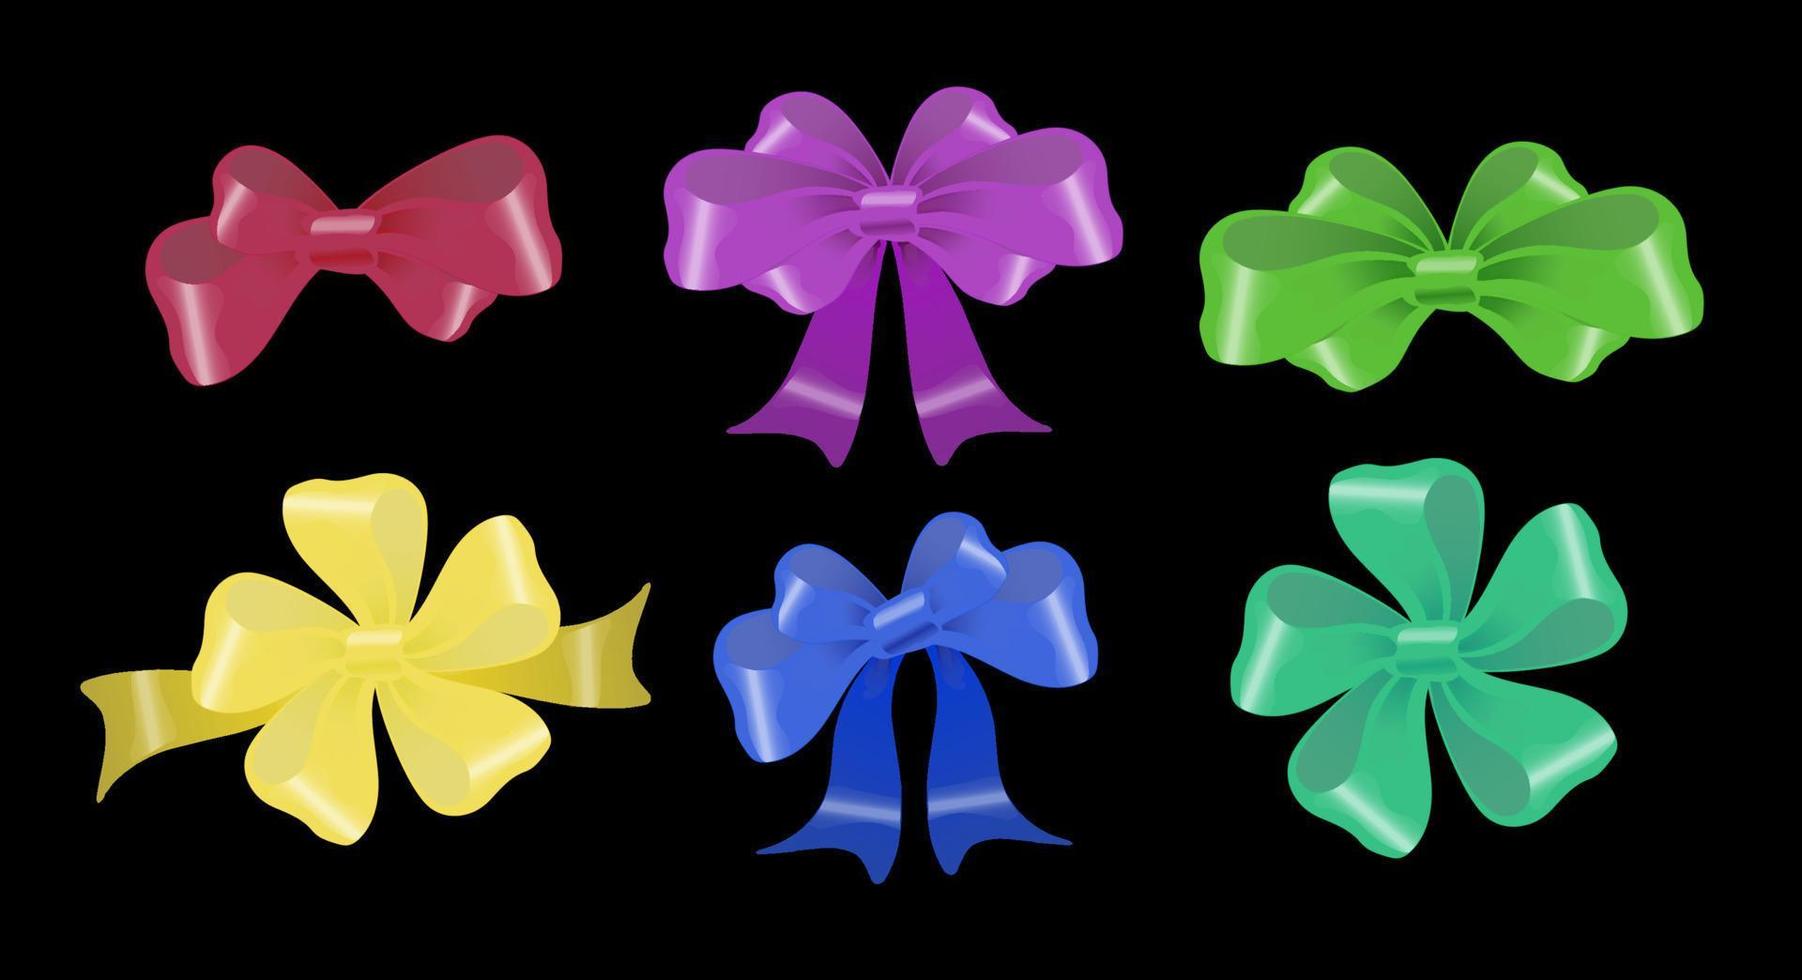 decorative multi-colored bows of various shapes vector